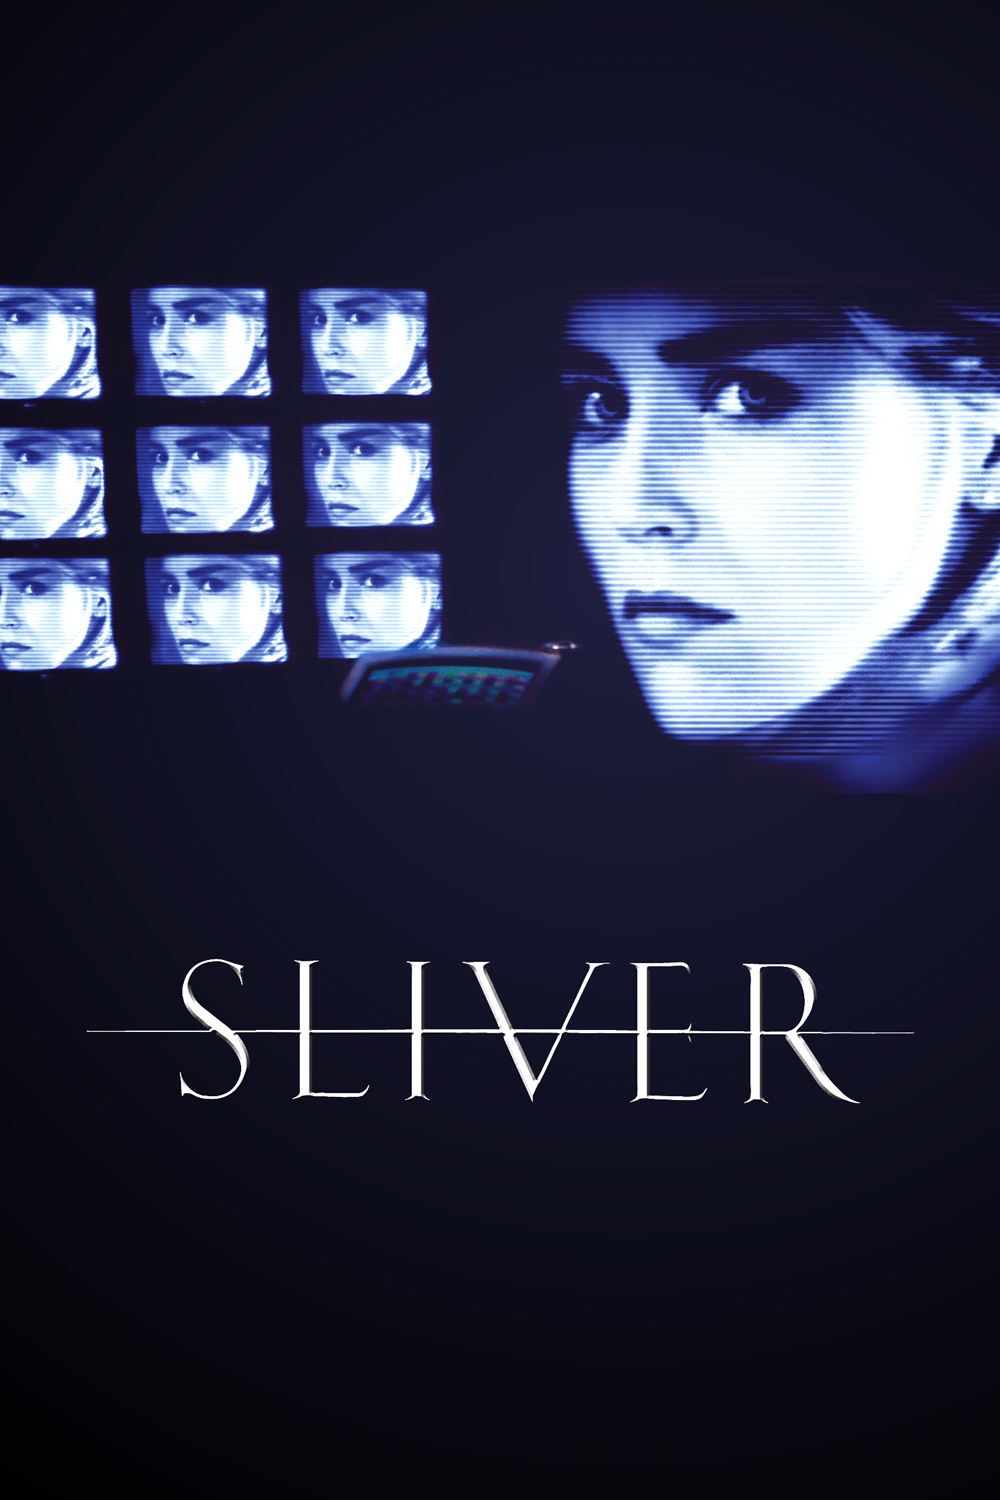 Poster for the movie "Sliver"